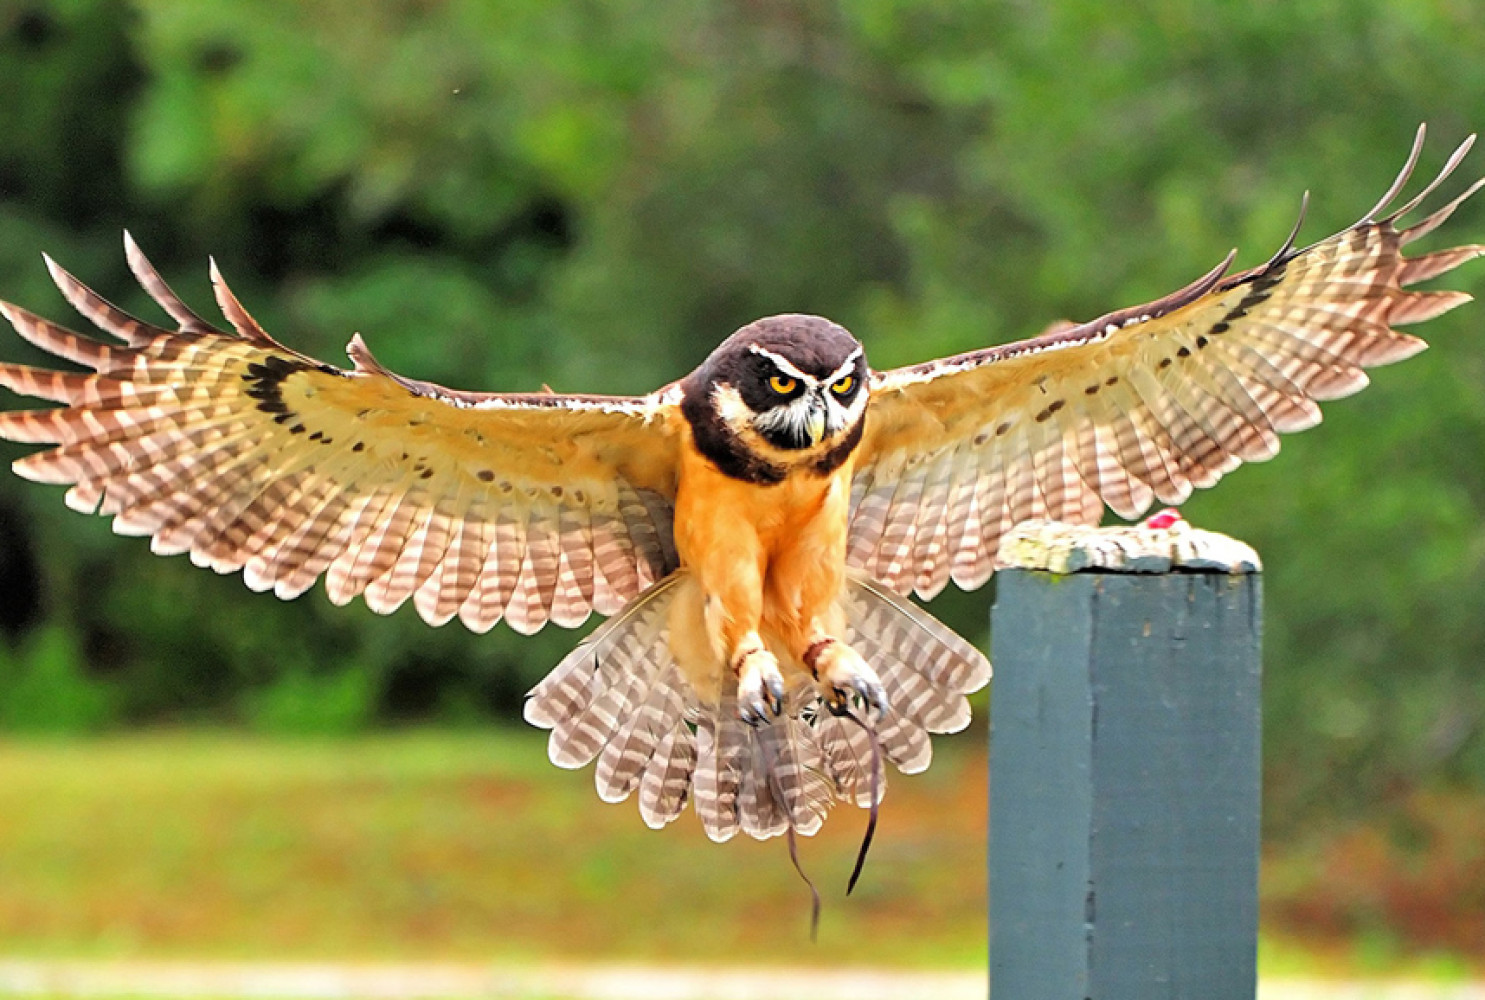 Enjoy a live flight demonstration with The Center for the Birds of Prey